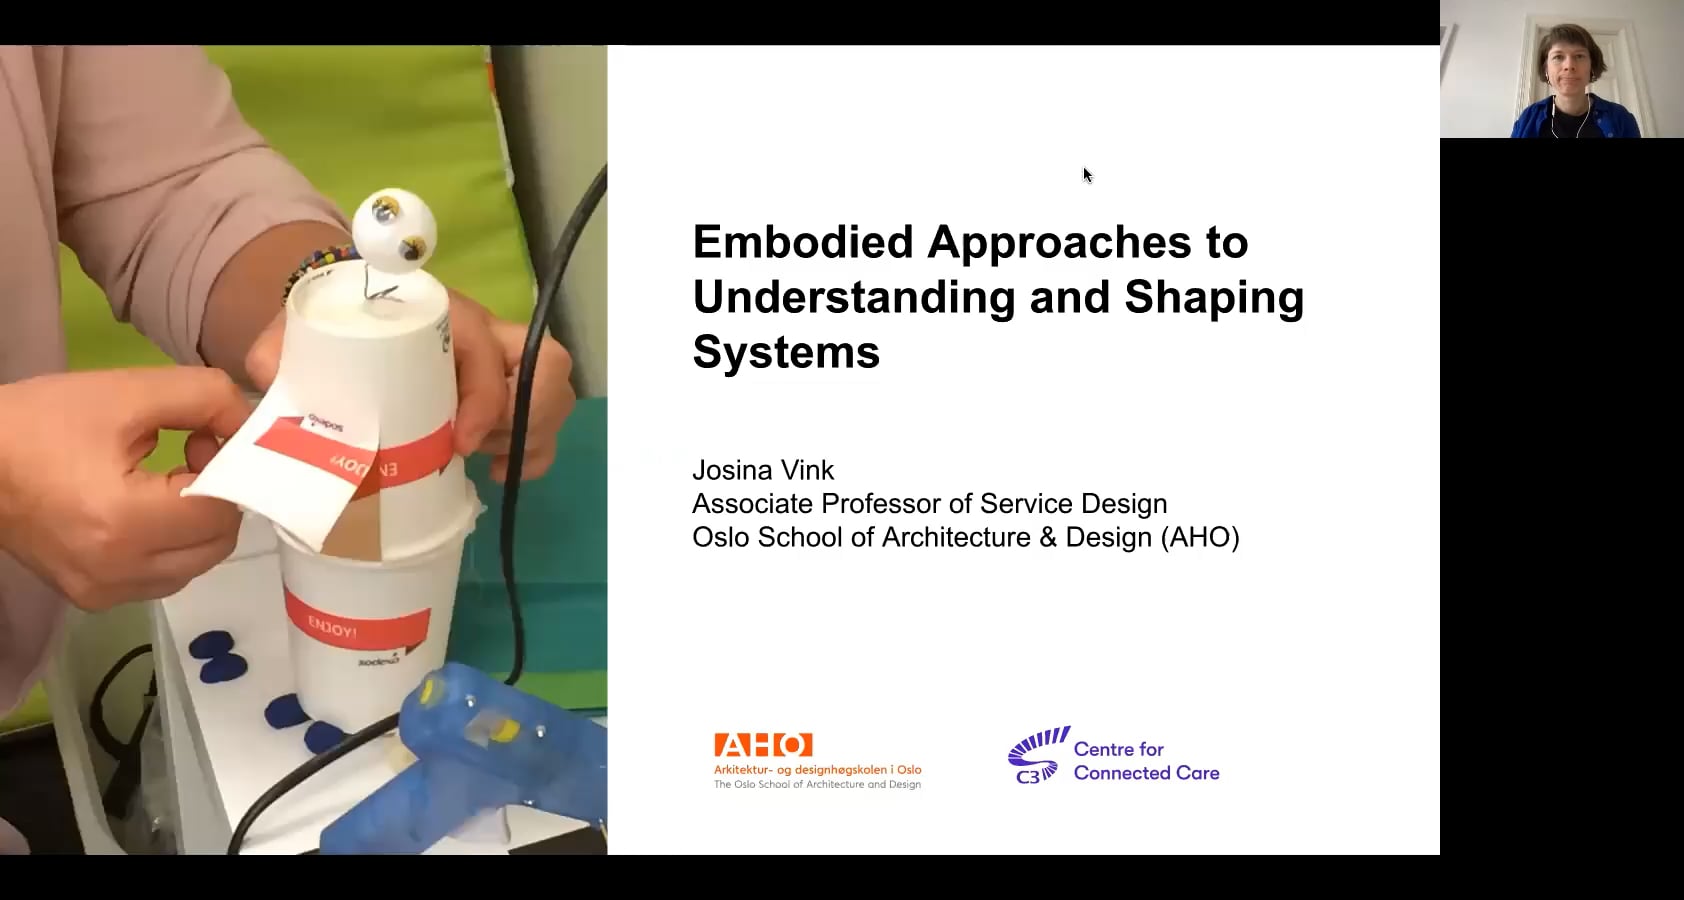 Josina Vink Approches to understanding systems